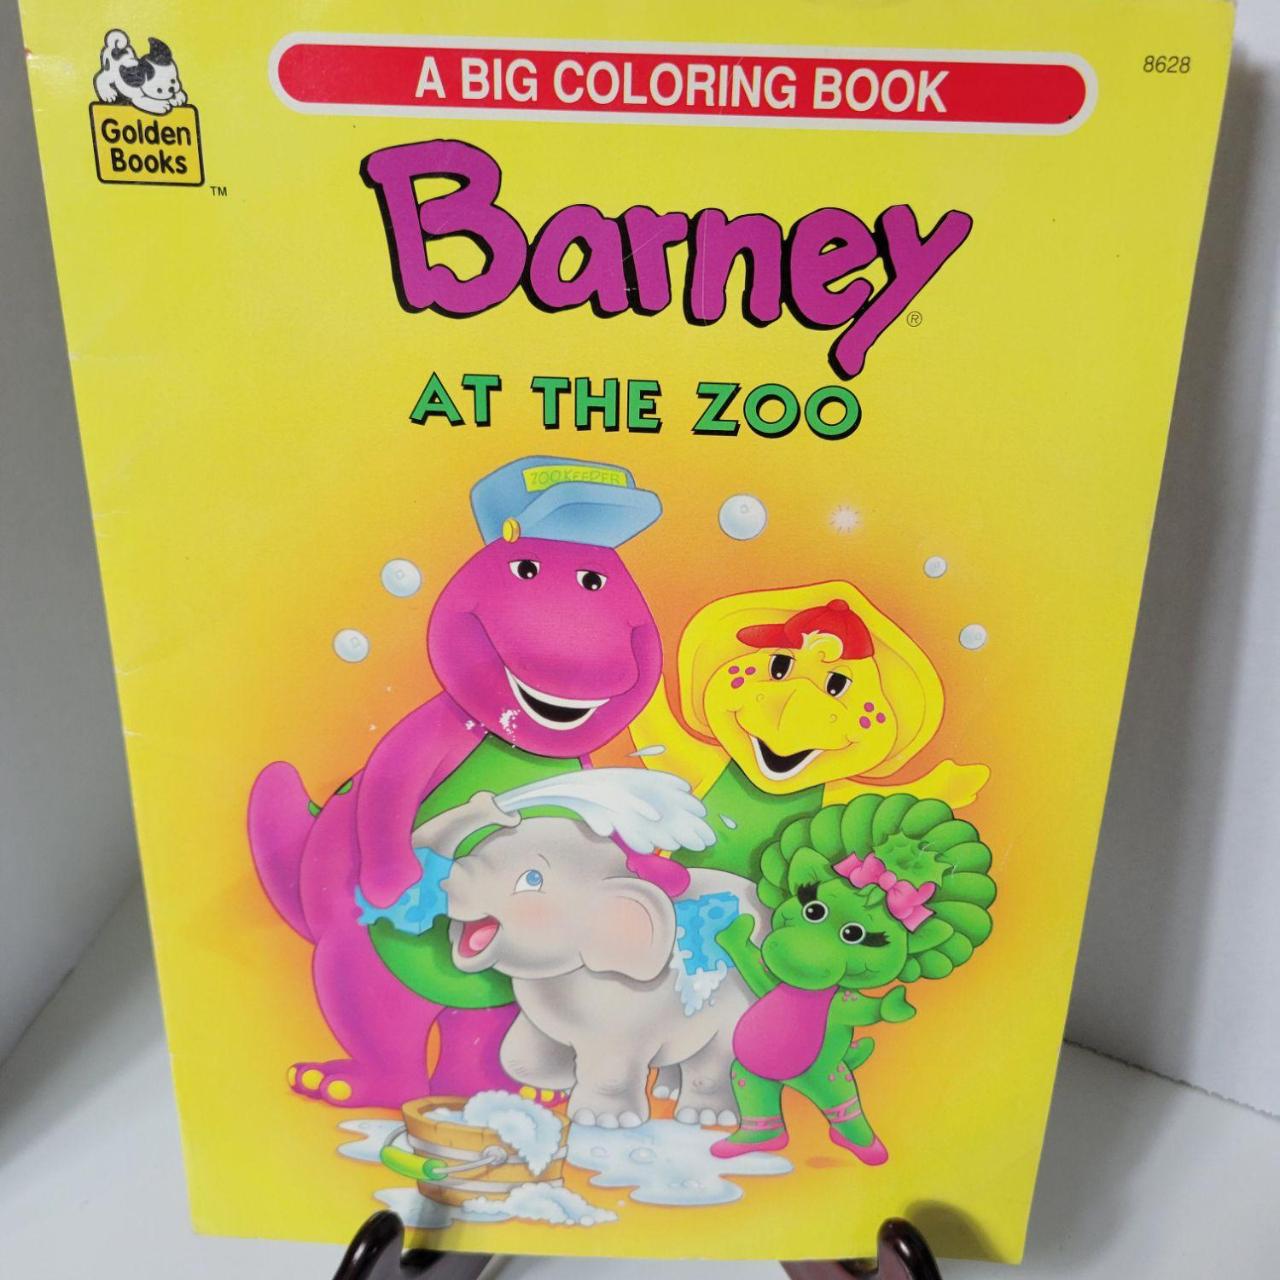 Golden Books Big Coloring Book Barney at the Zoo - Depop